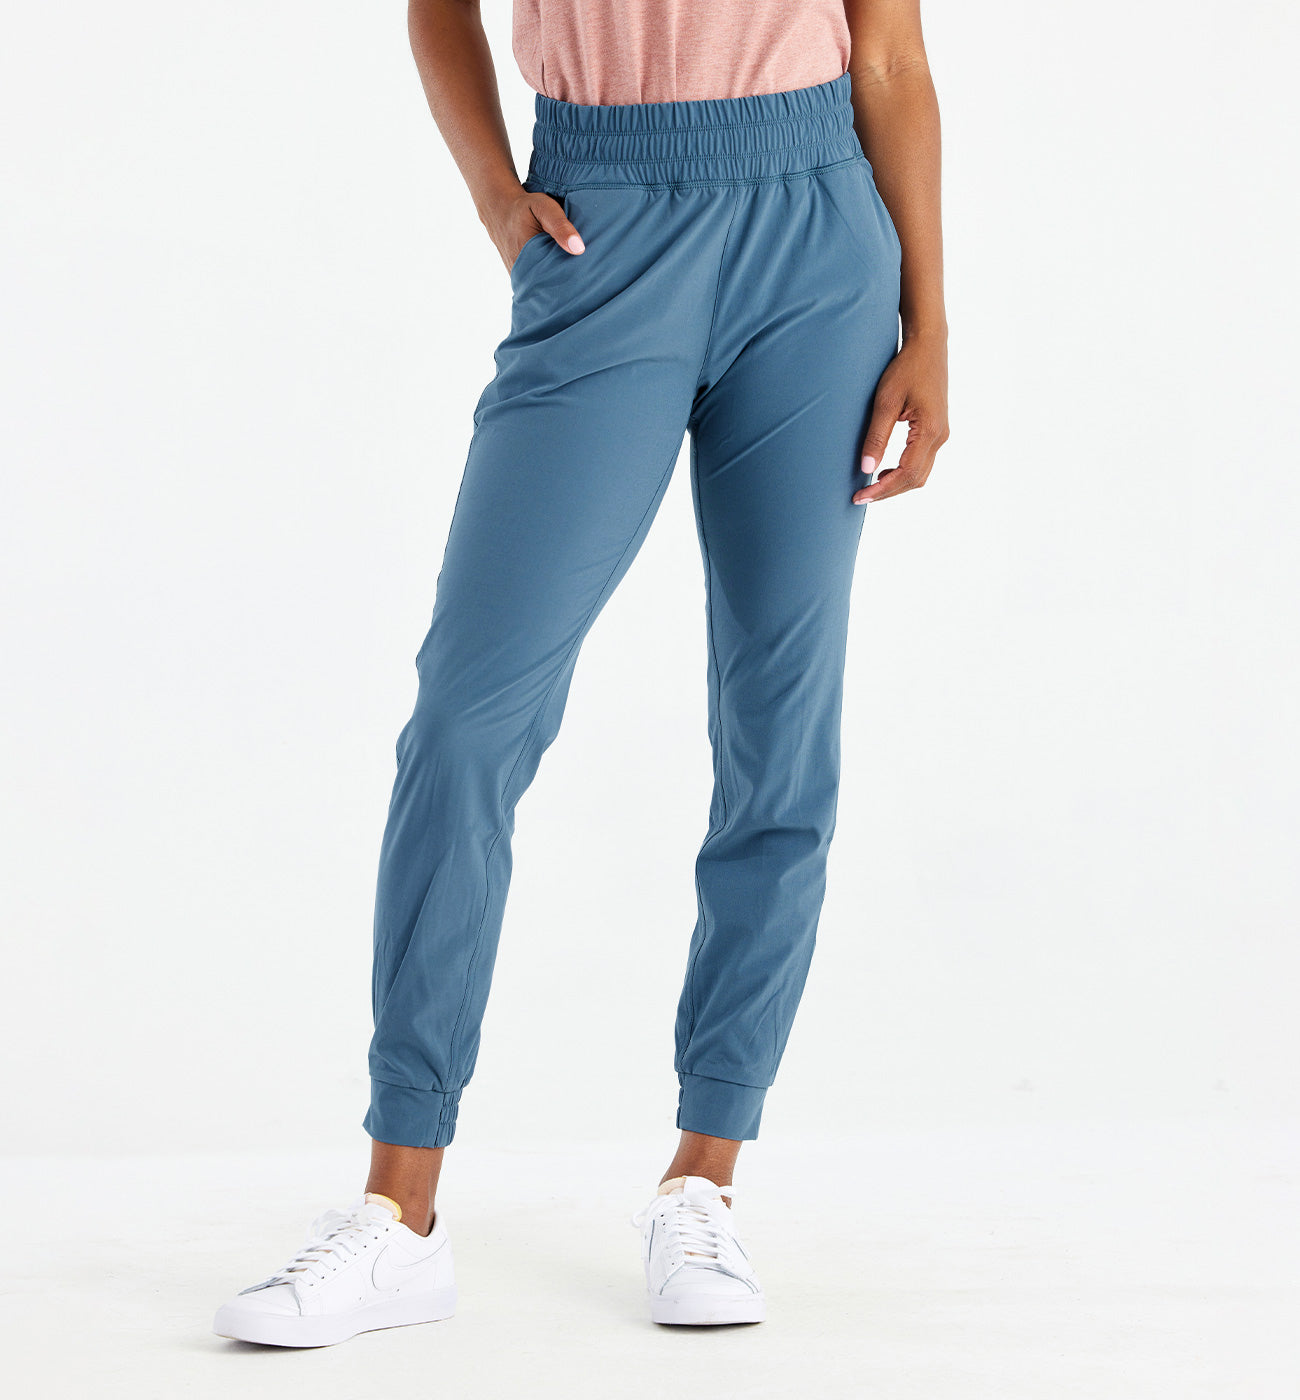 Women's Pants & Shorts – Tailwaters Fly Fishing